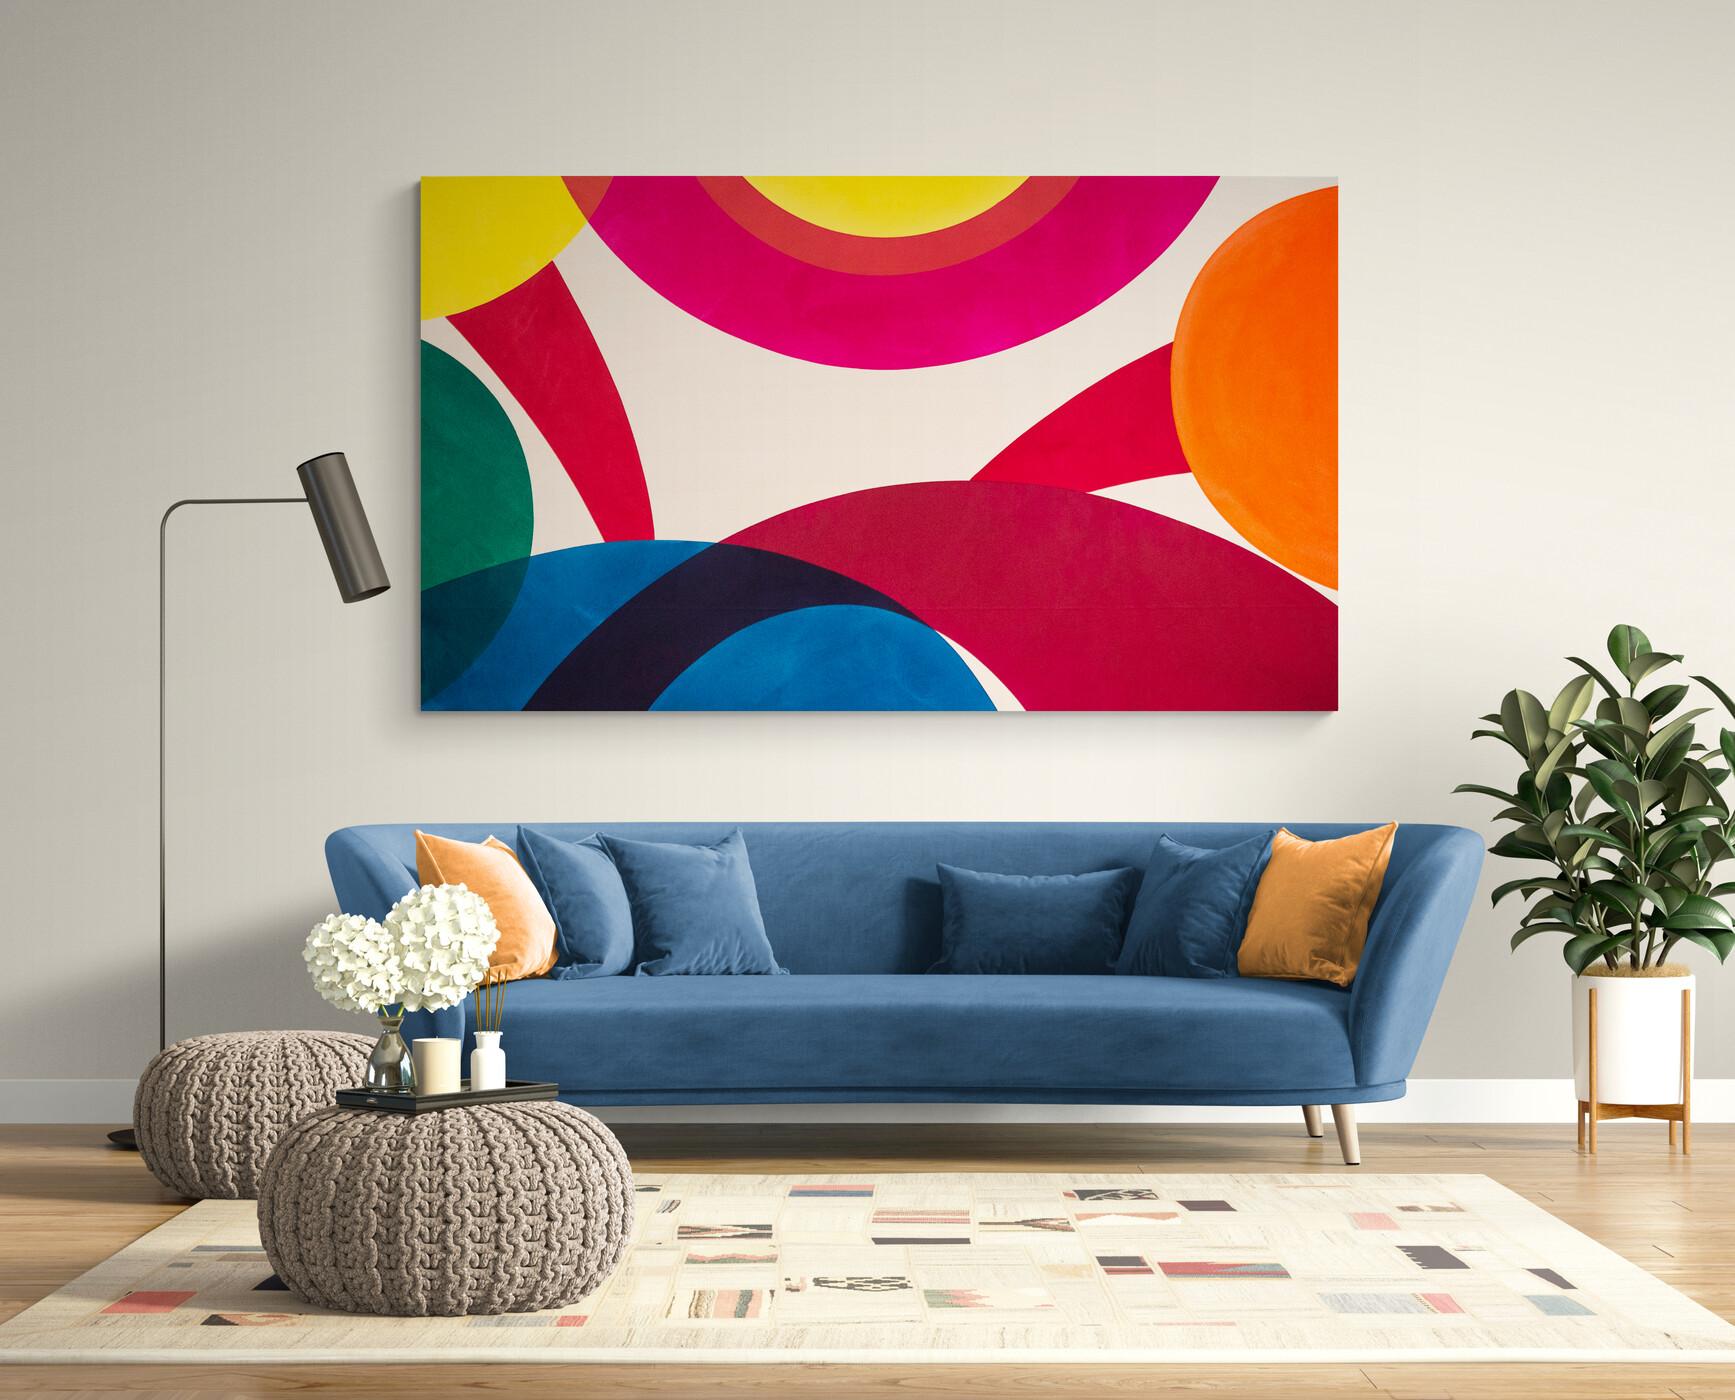 Orange and Green with Yellow Sun - colorful, abstract shapes, acrylic on canvas - Abstract Painting by Aron Hill